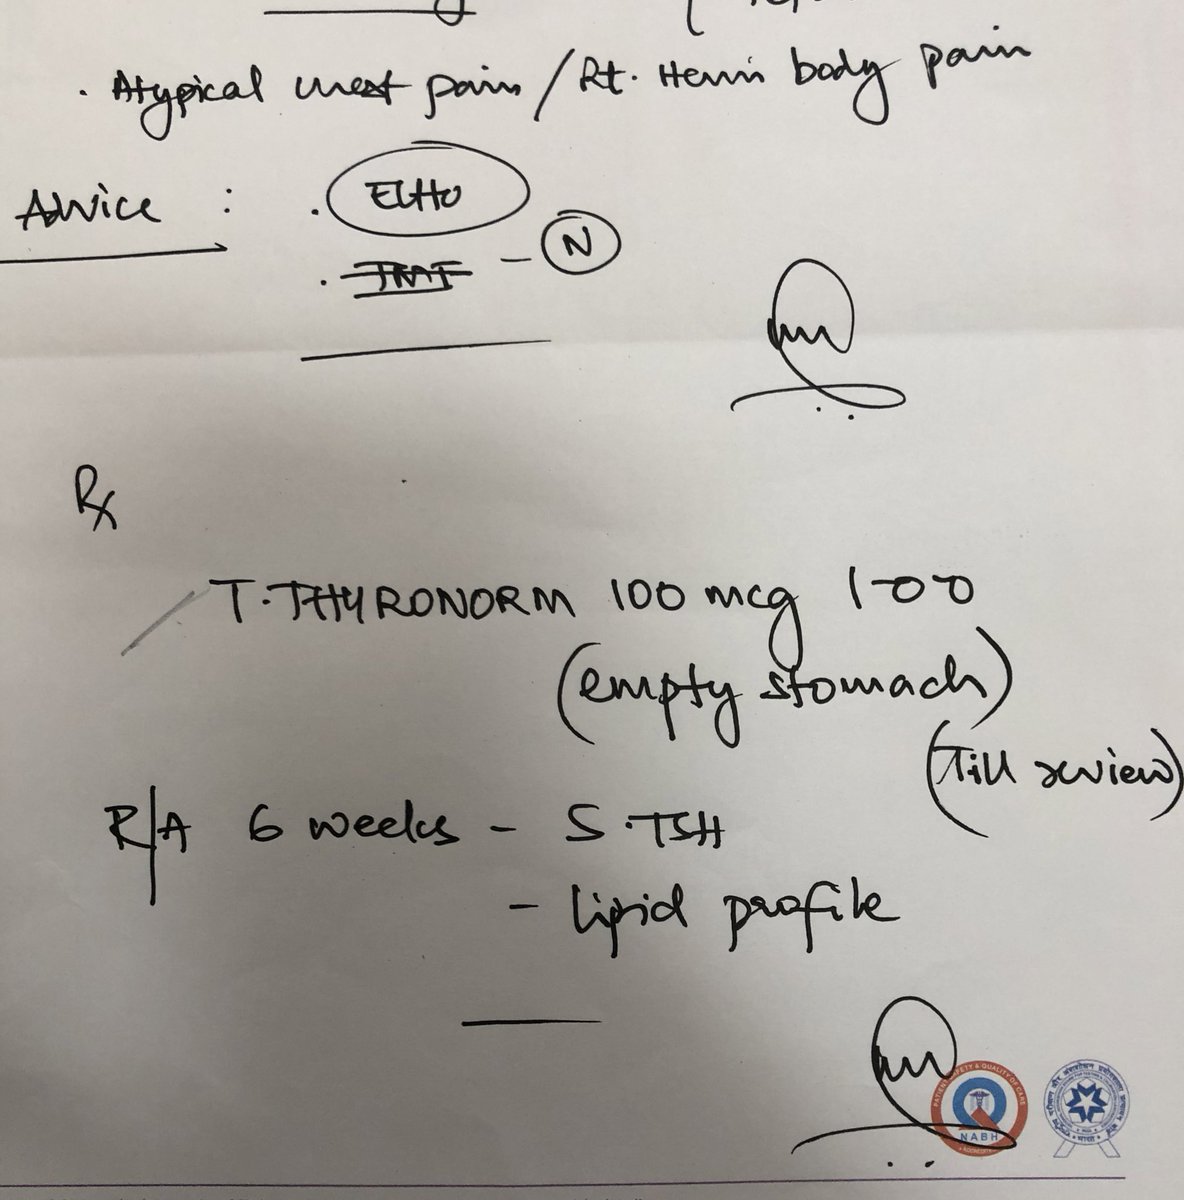 Started on Thyroxine replacement 100mcg per day. Asked to repeat Lipids and TSH after 6 weeks. Didn't start statins as there was a correctable cause - low thyroid function in this case.  #LowMetabolism